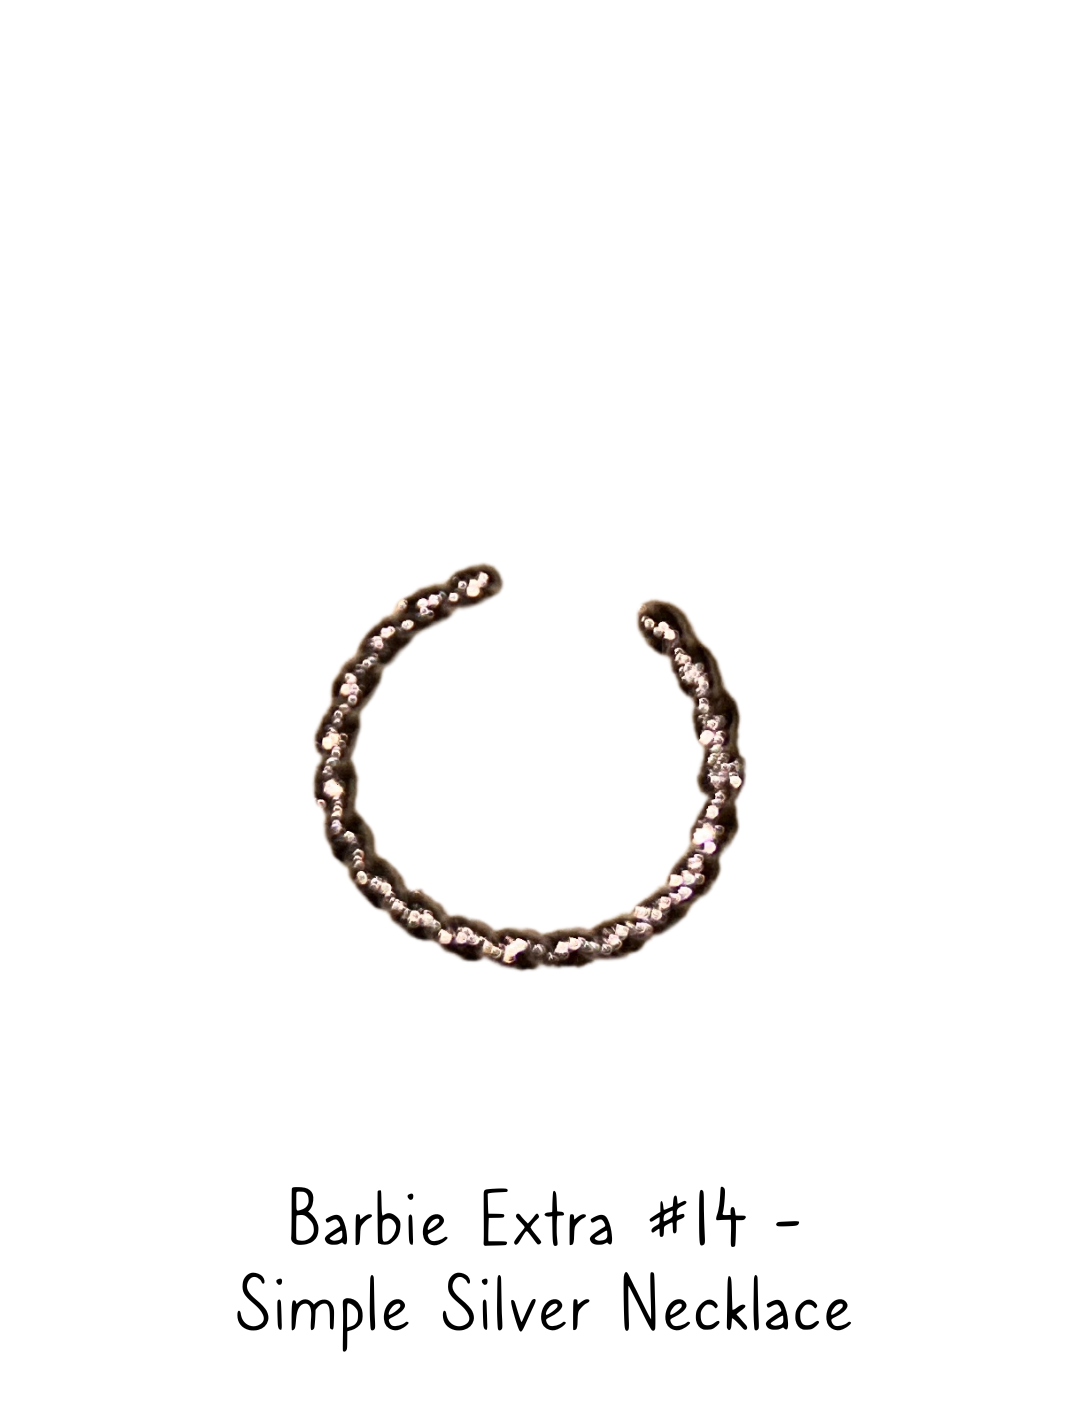 Barbie Extra #14 Fashion Doll Simple Silver Necklace